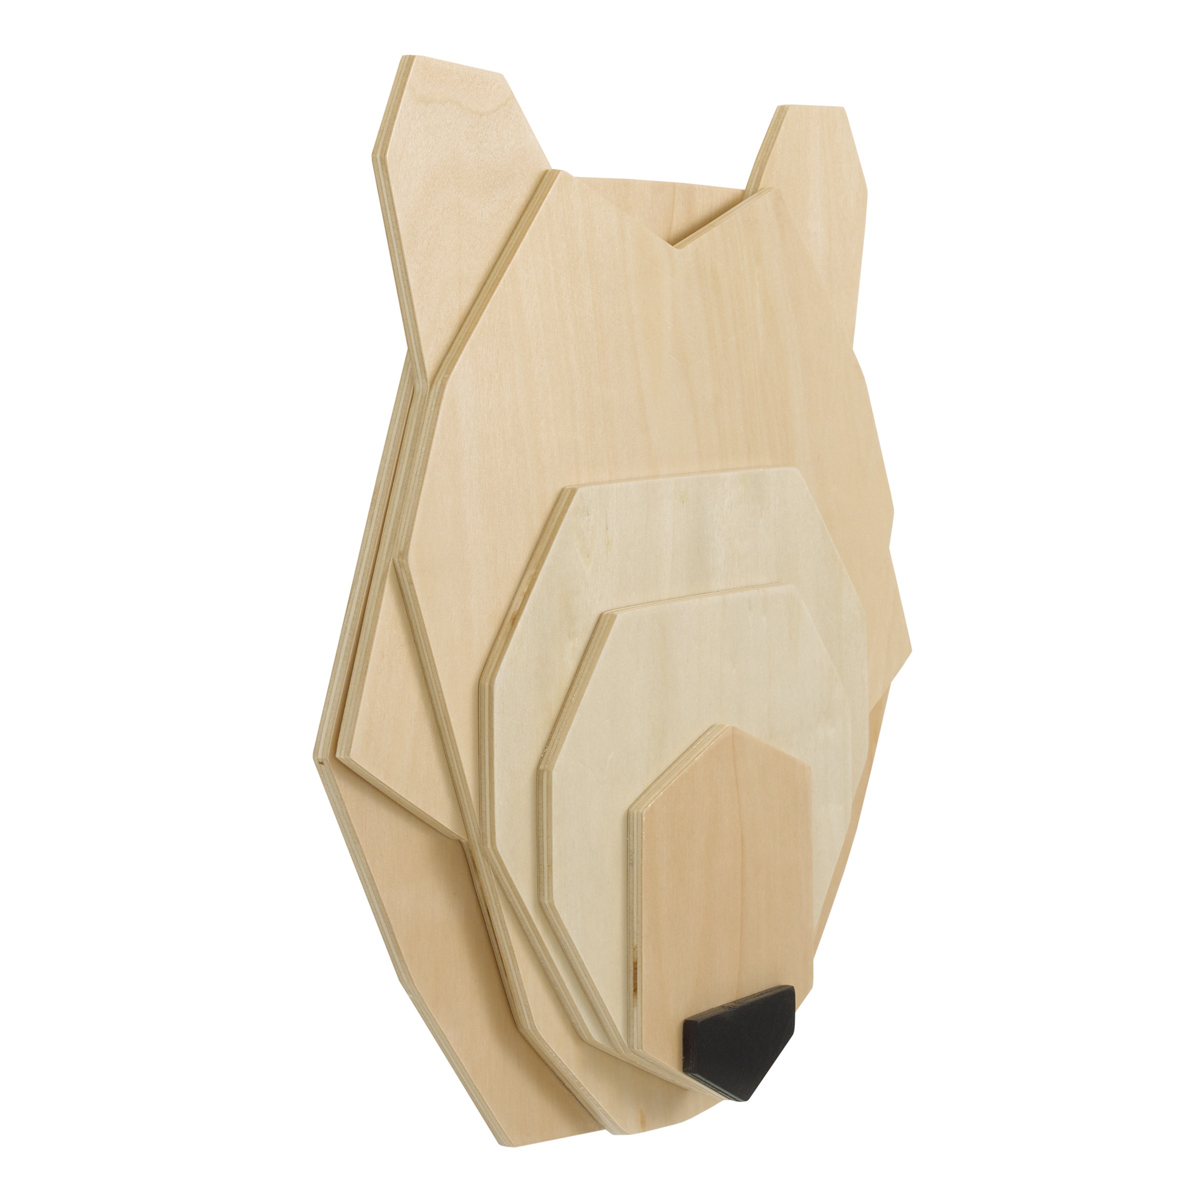 Little Love By NoJo Wood Layered Bear Wall Decor